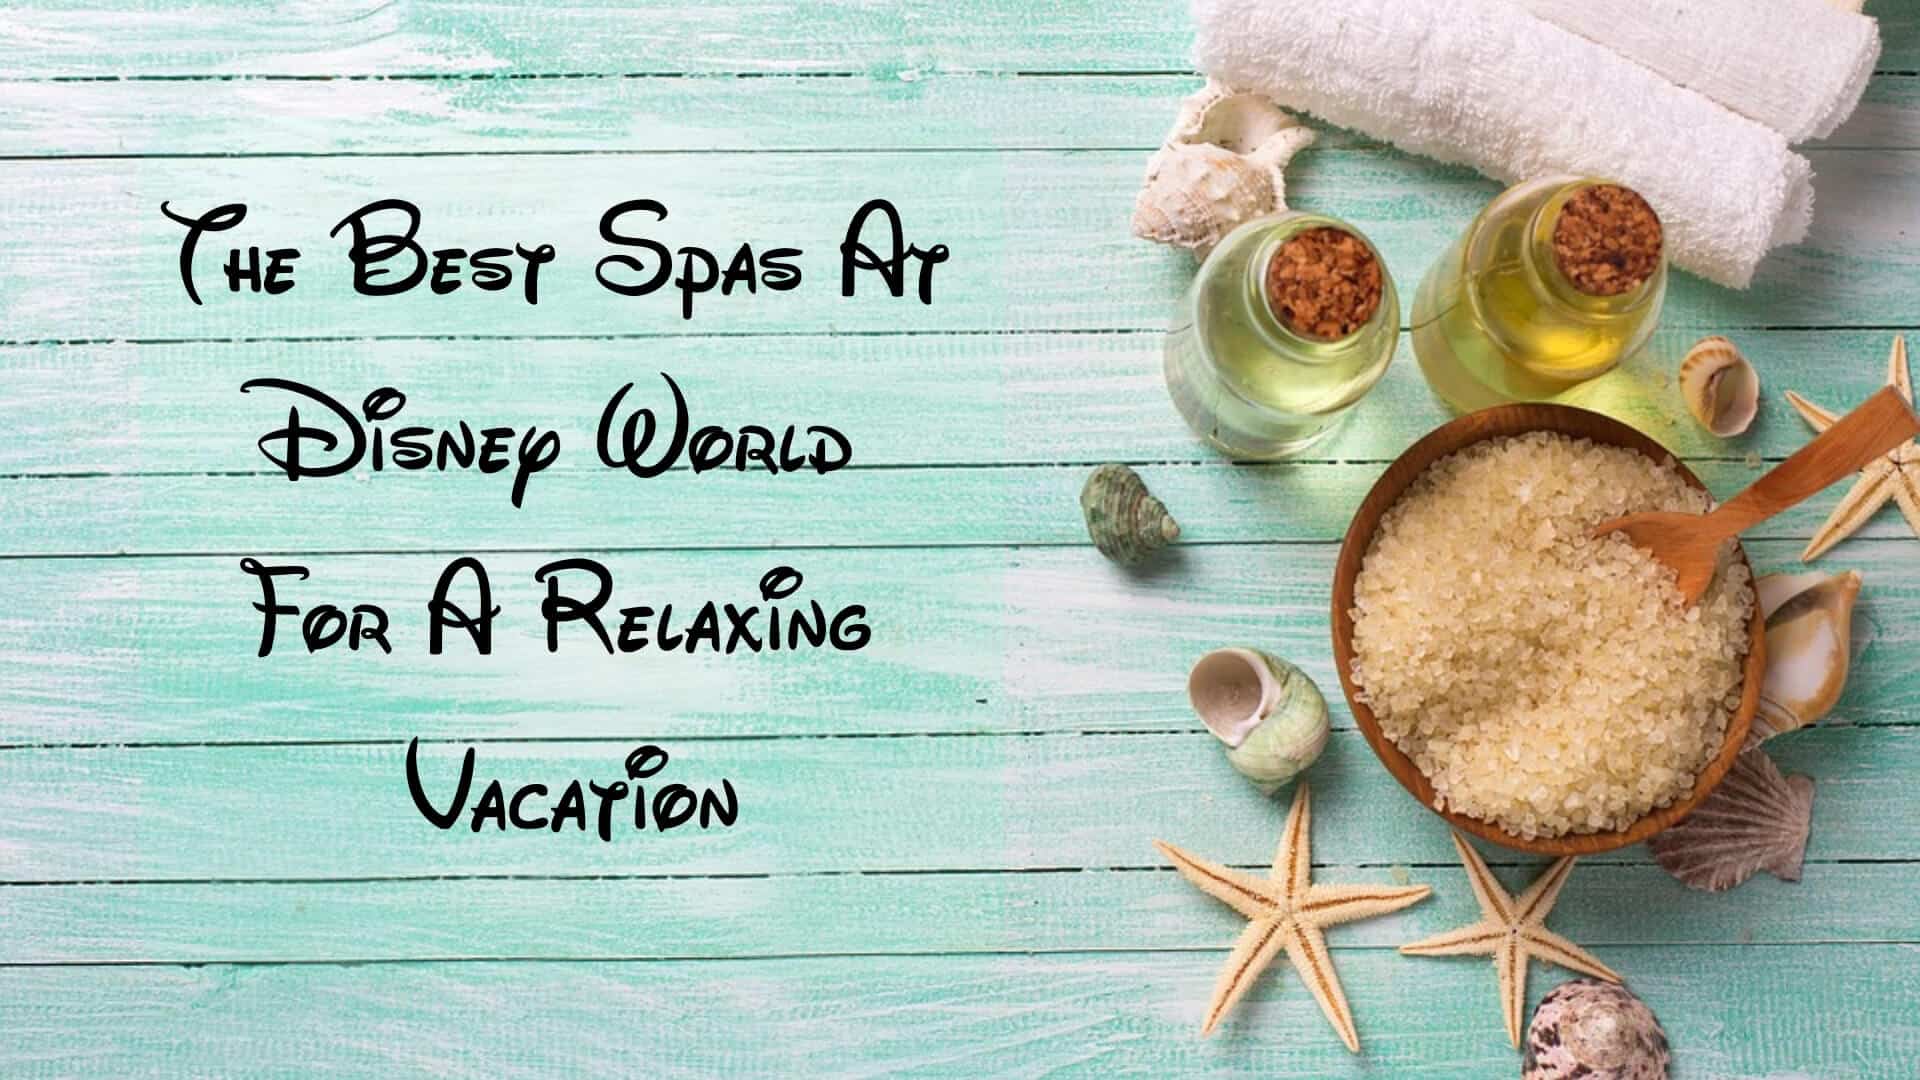 The Best Spas At Disney World For A Relaxing Vacation Tips 1